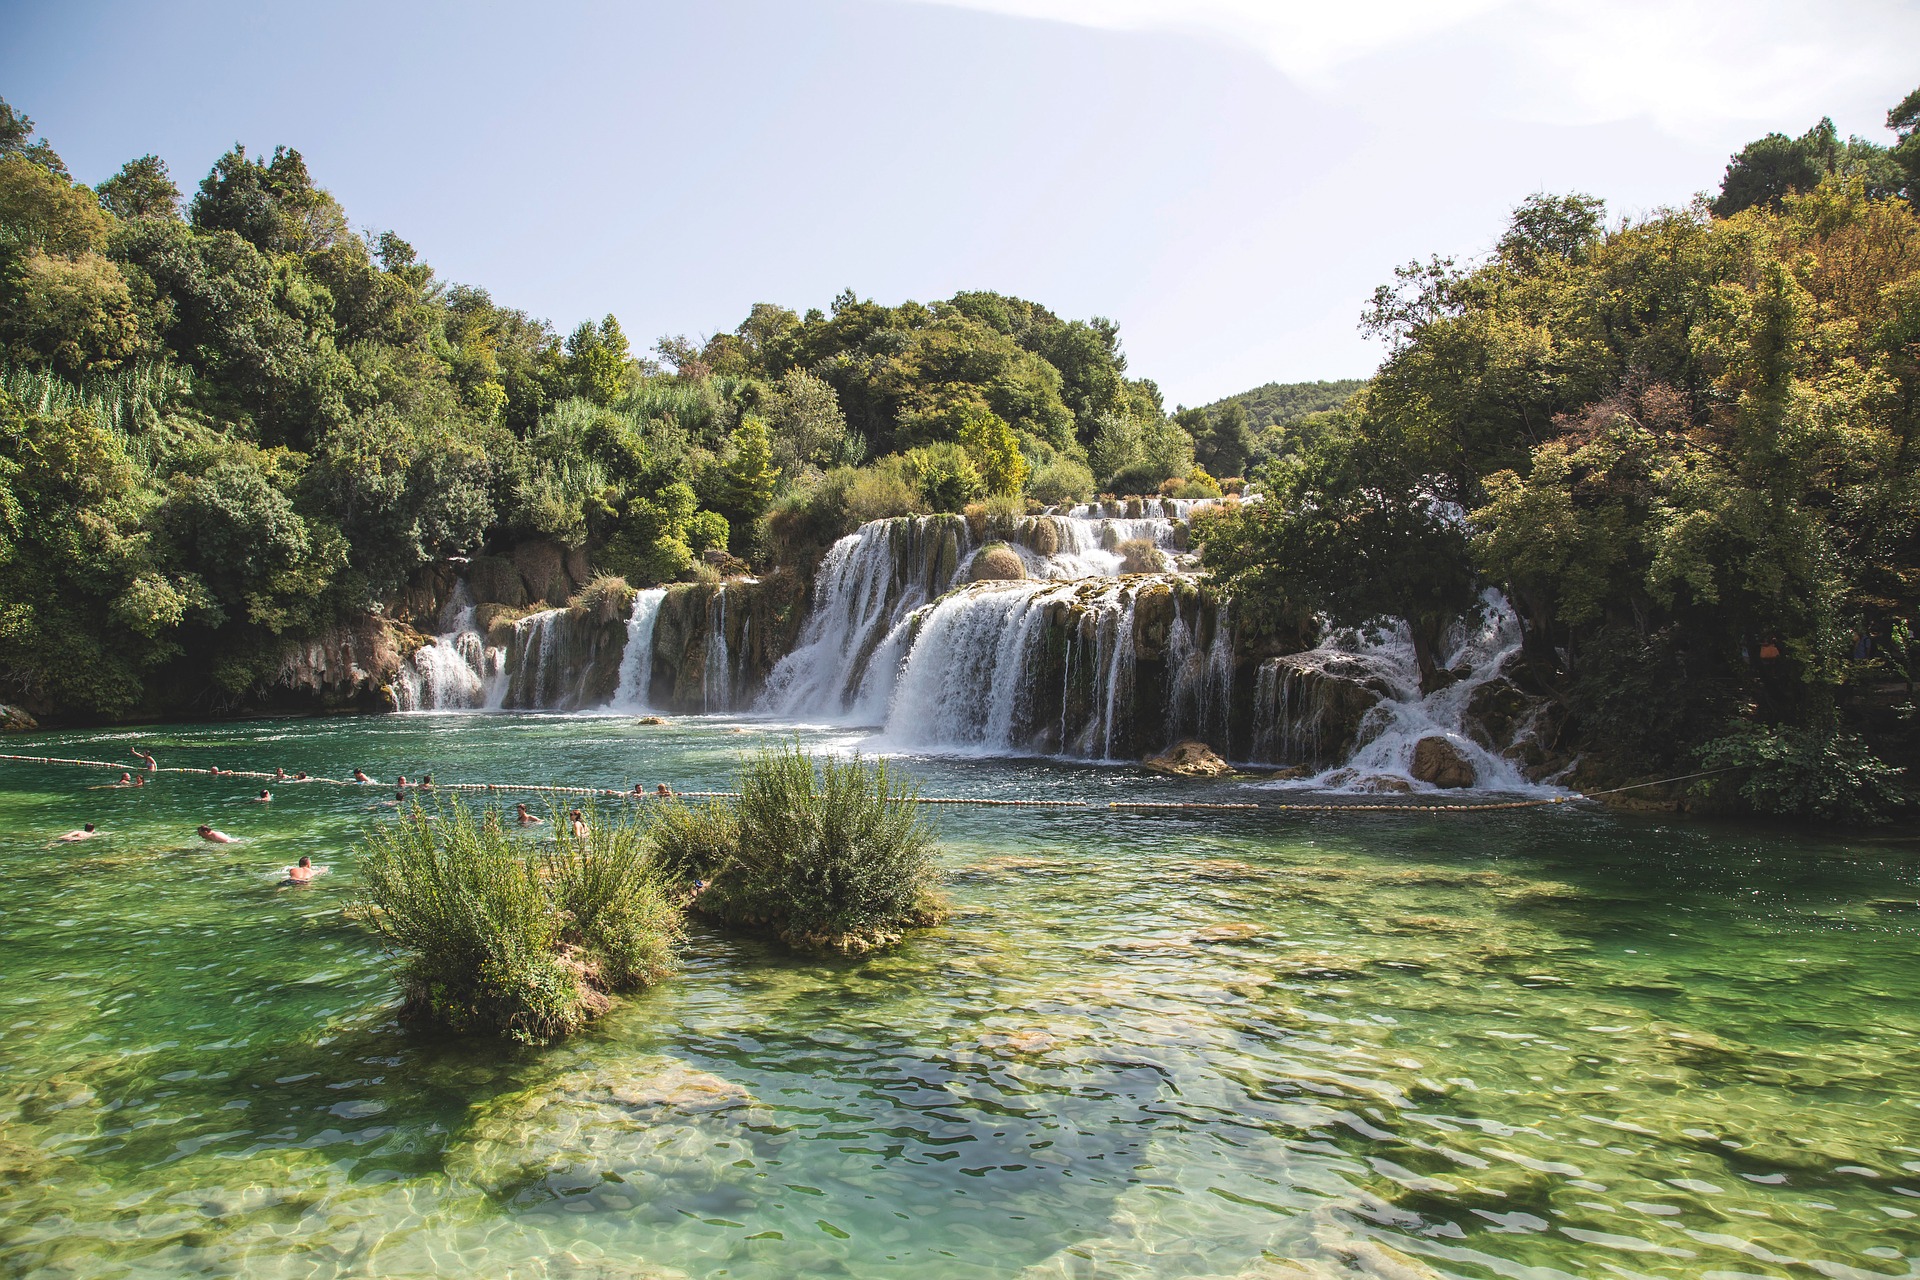 A Visitor’s Guide to Krka National Park